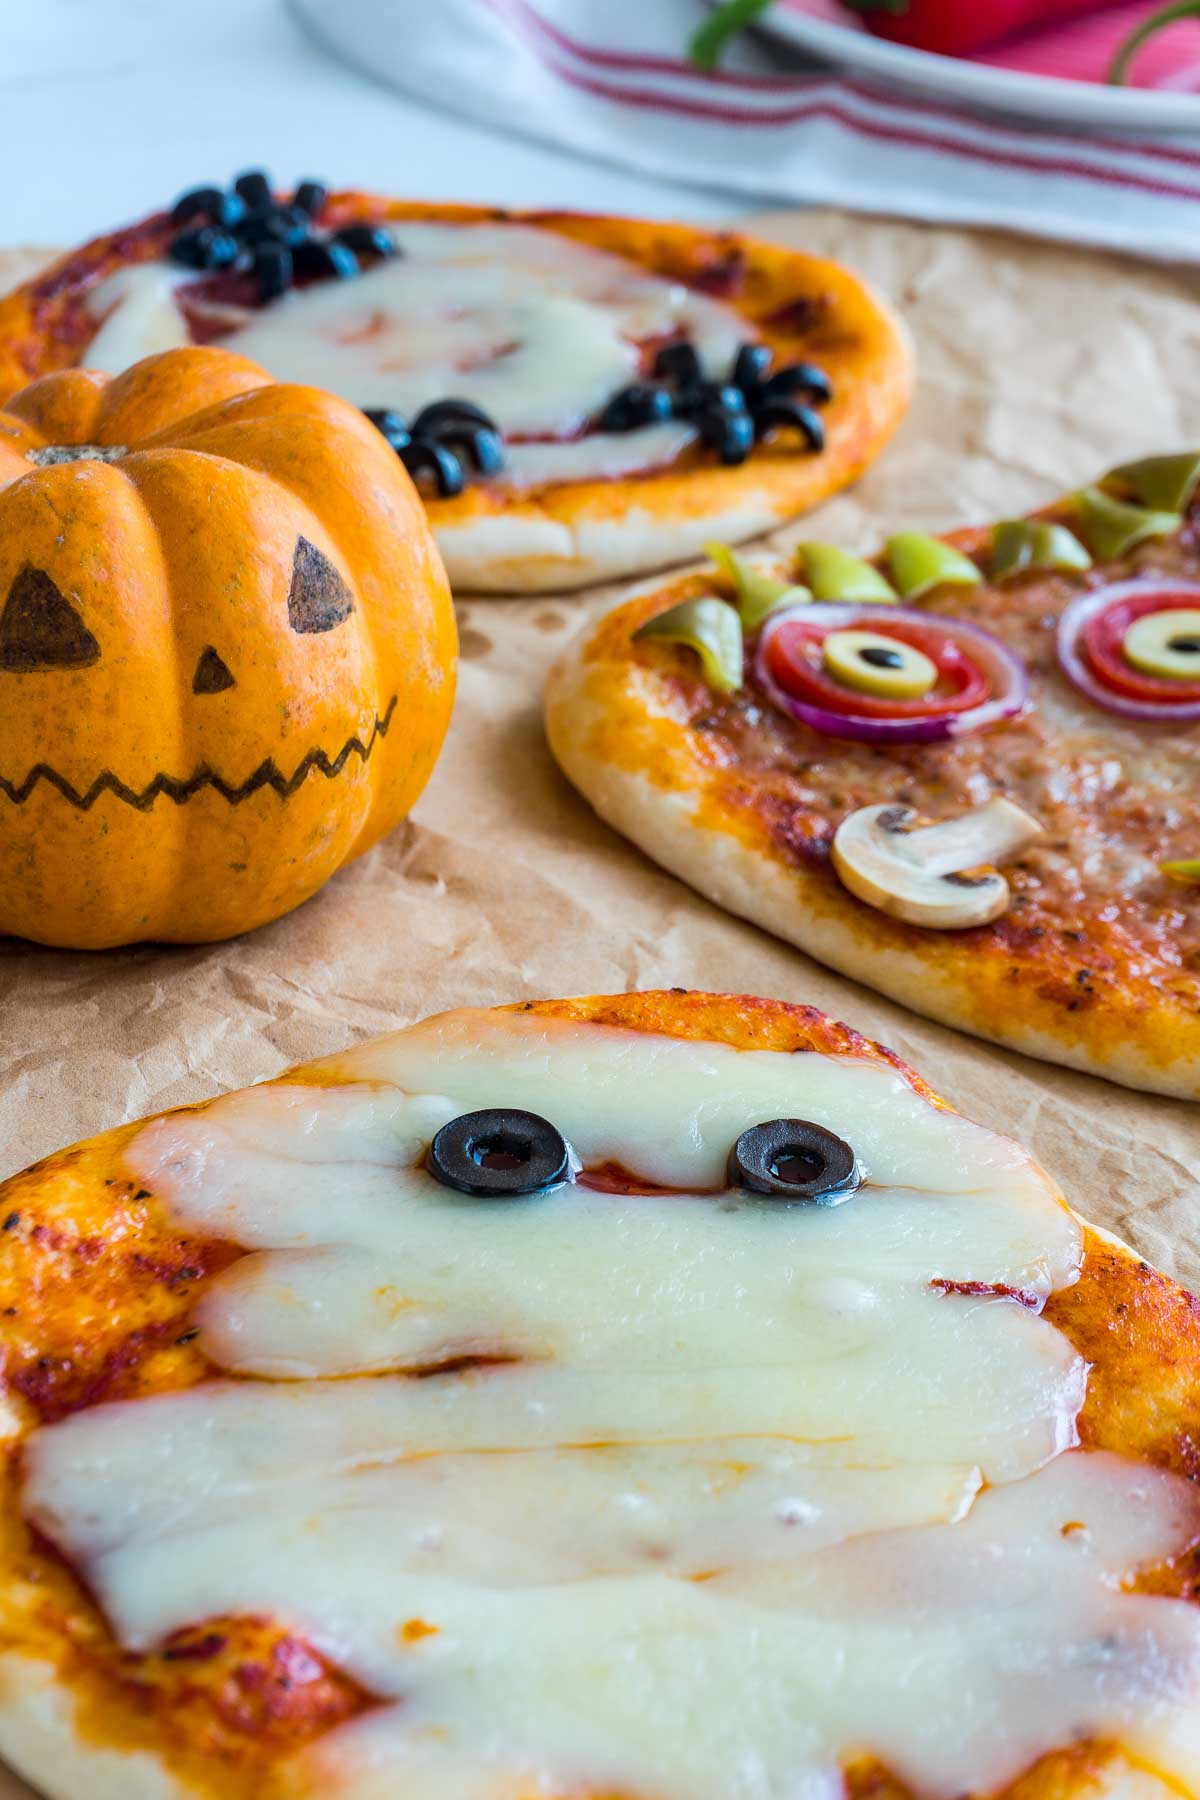 Halloween-themed pizza that looks like a mummy. (The bandages are made of cheese, and the eyes are made of black olive slices.)